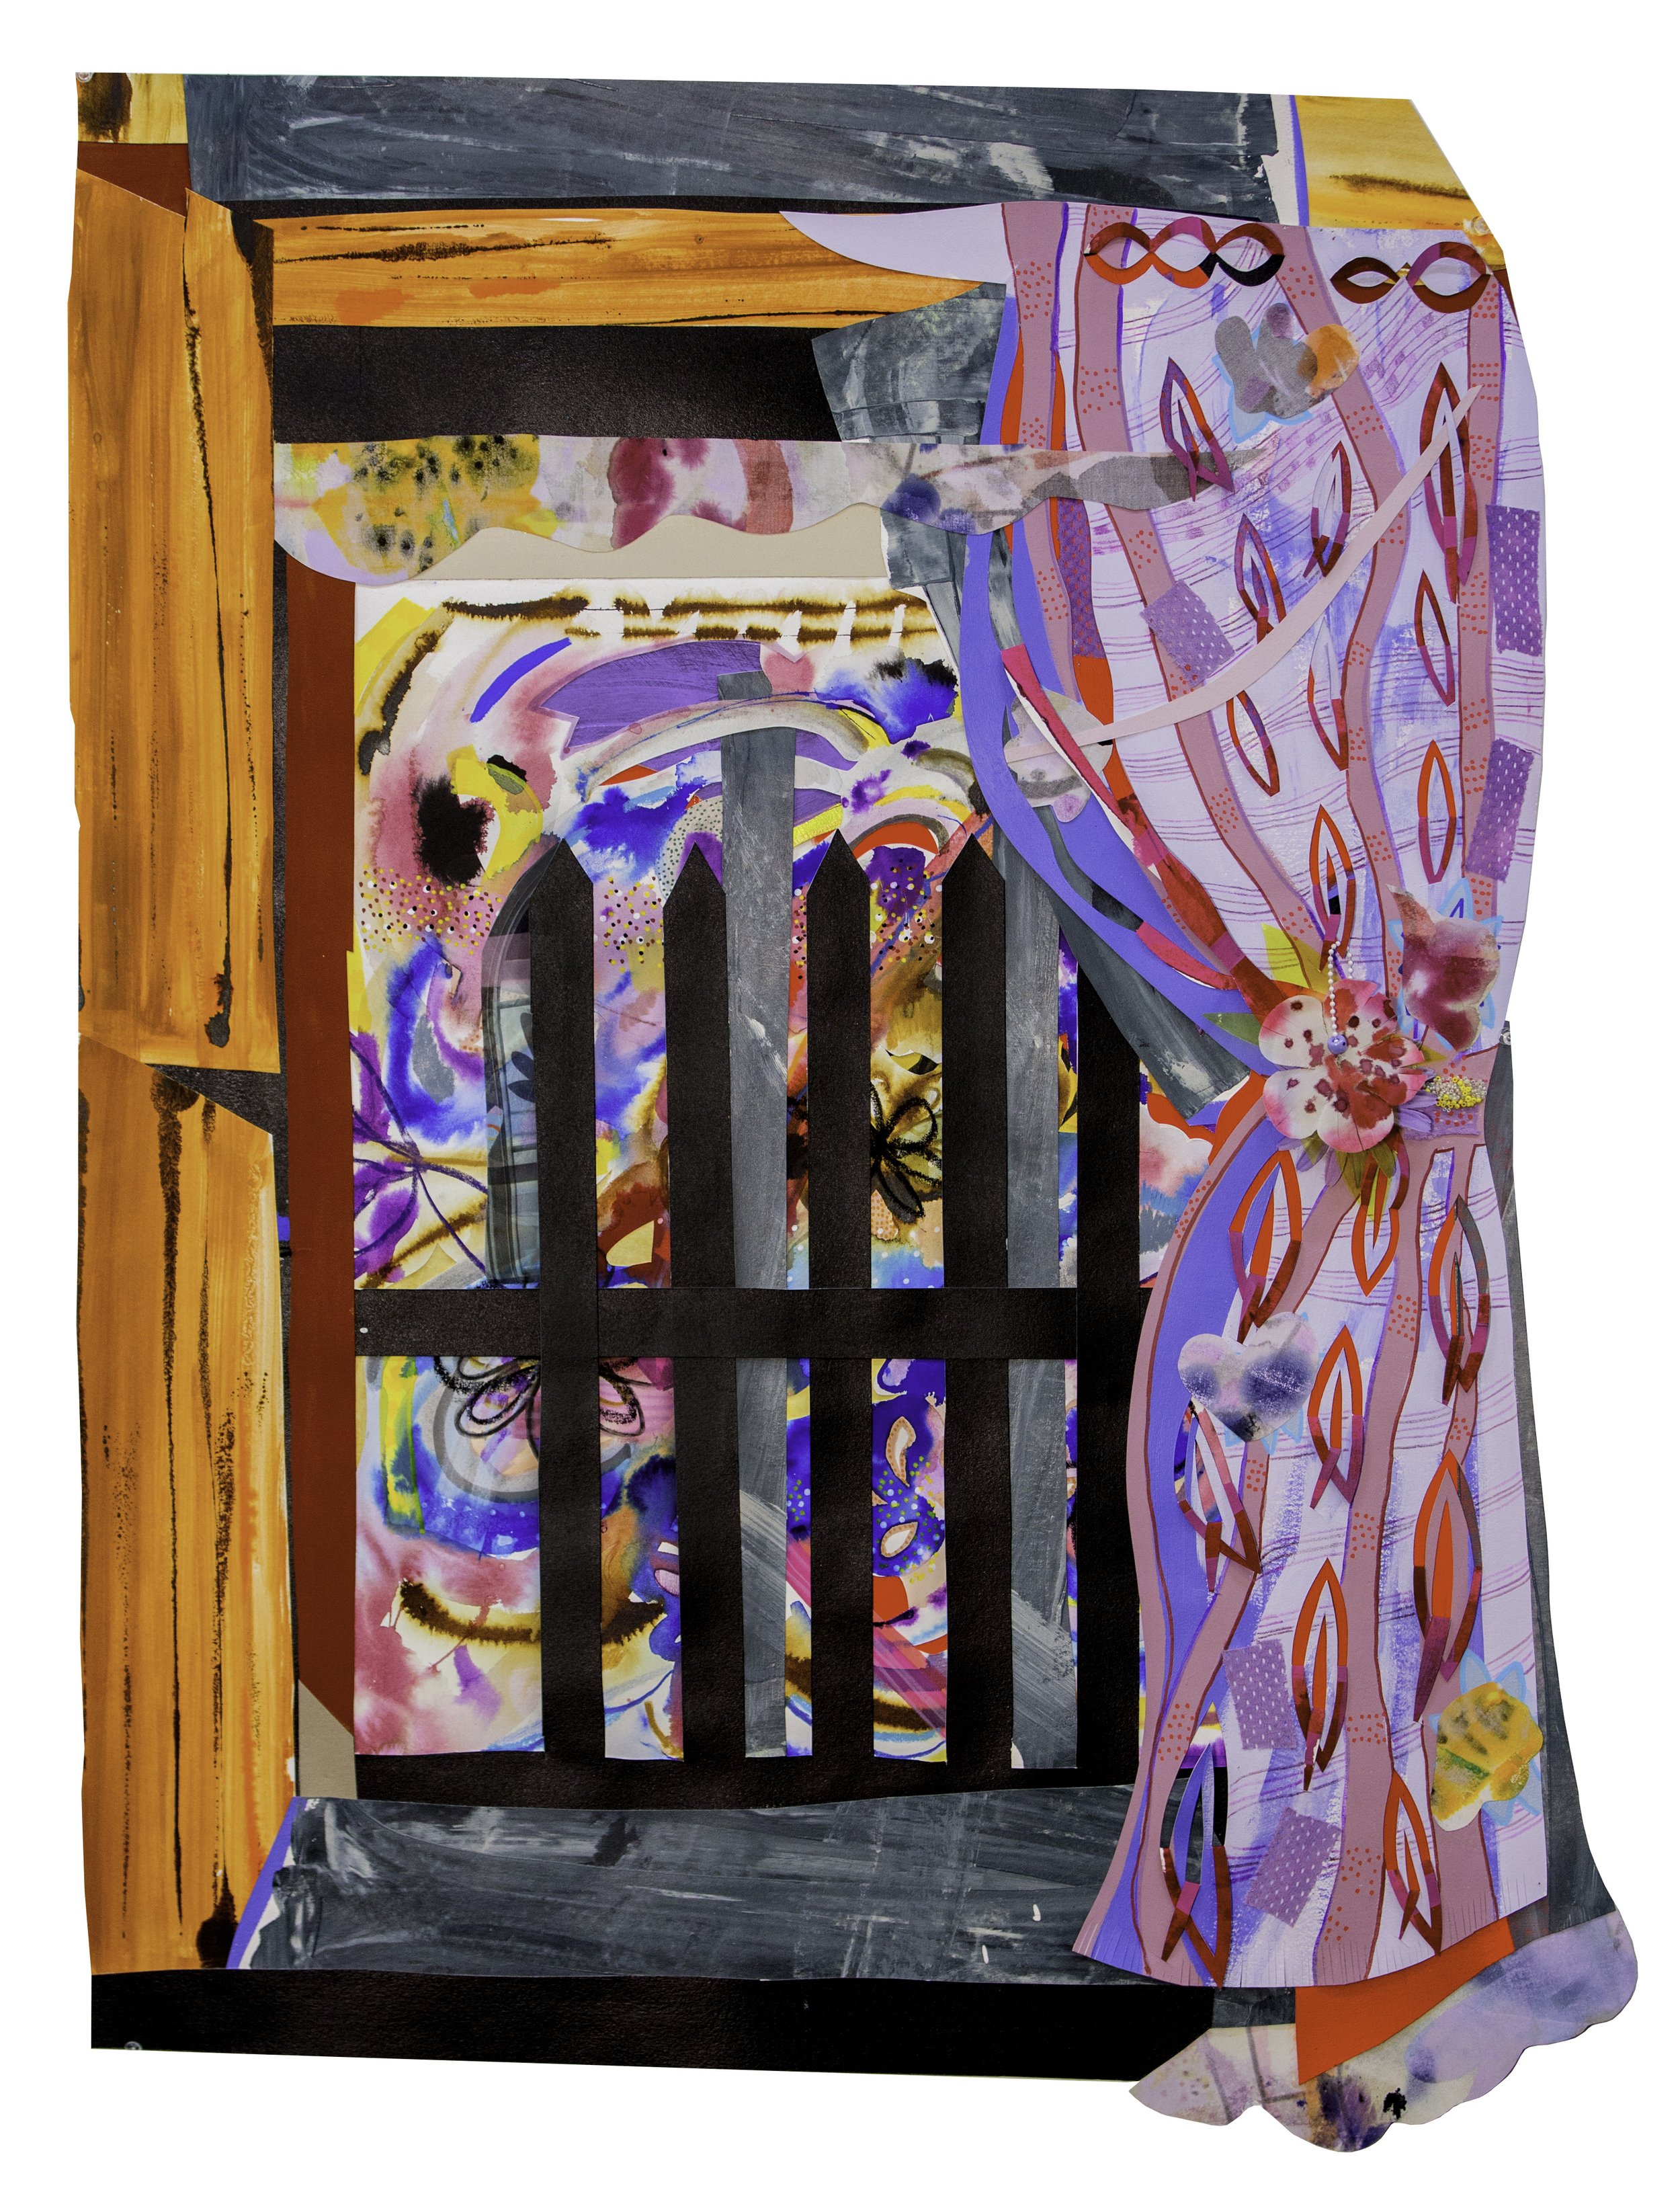  PURPLE CURTAINS AT A CABIN | 38 x 29 inches / 96.5 x 73.6 cm, Mixed media and collage on paper, 2021 